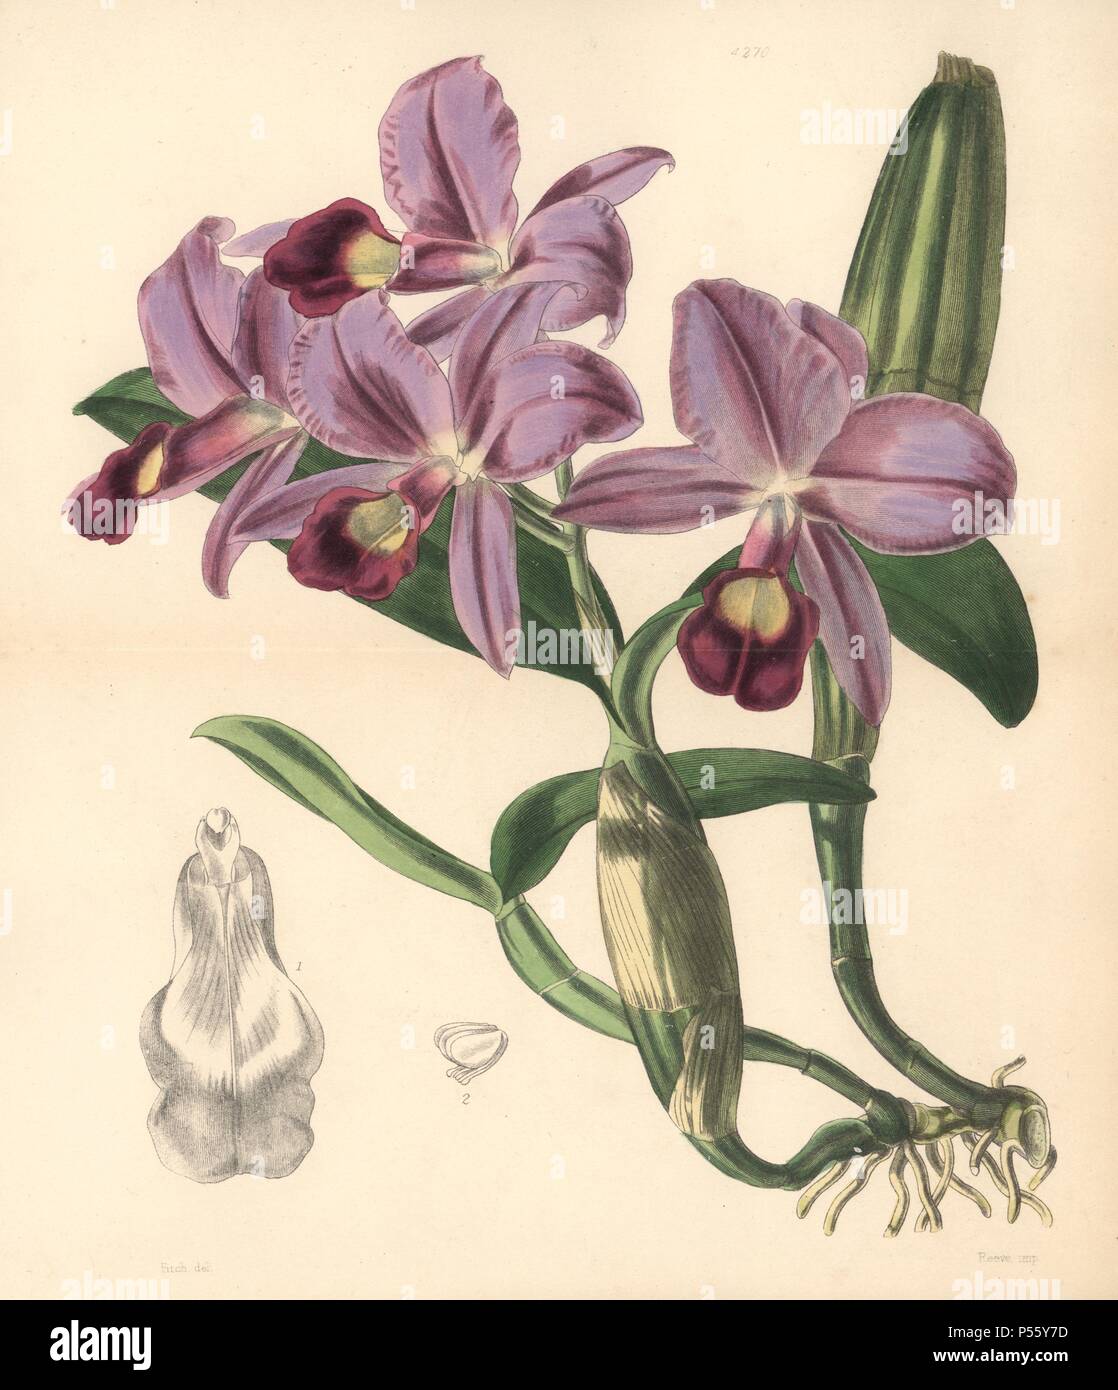 Mr. Skinner's cattleya orchid, Cattleya skinneri. Hand-coloured botanical illustration drawn and lithographed by Walter Hood Fitch for Sir William Jackson Hooker's 'Curtis's Botanical Magazine,' London, Reeve Brothers, 1846. Fitch (18171892) was a tireless Scottish artist who drew over 2,700 lithographs for the 'Botanical Magazine' starting from 1834. Stock Photo